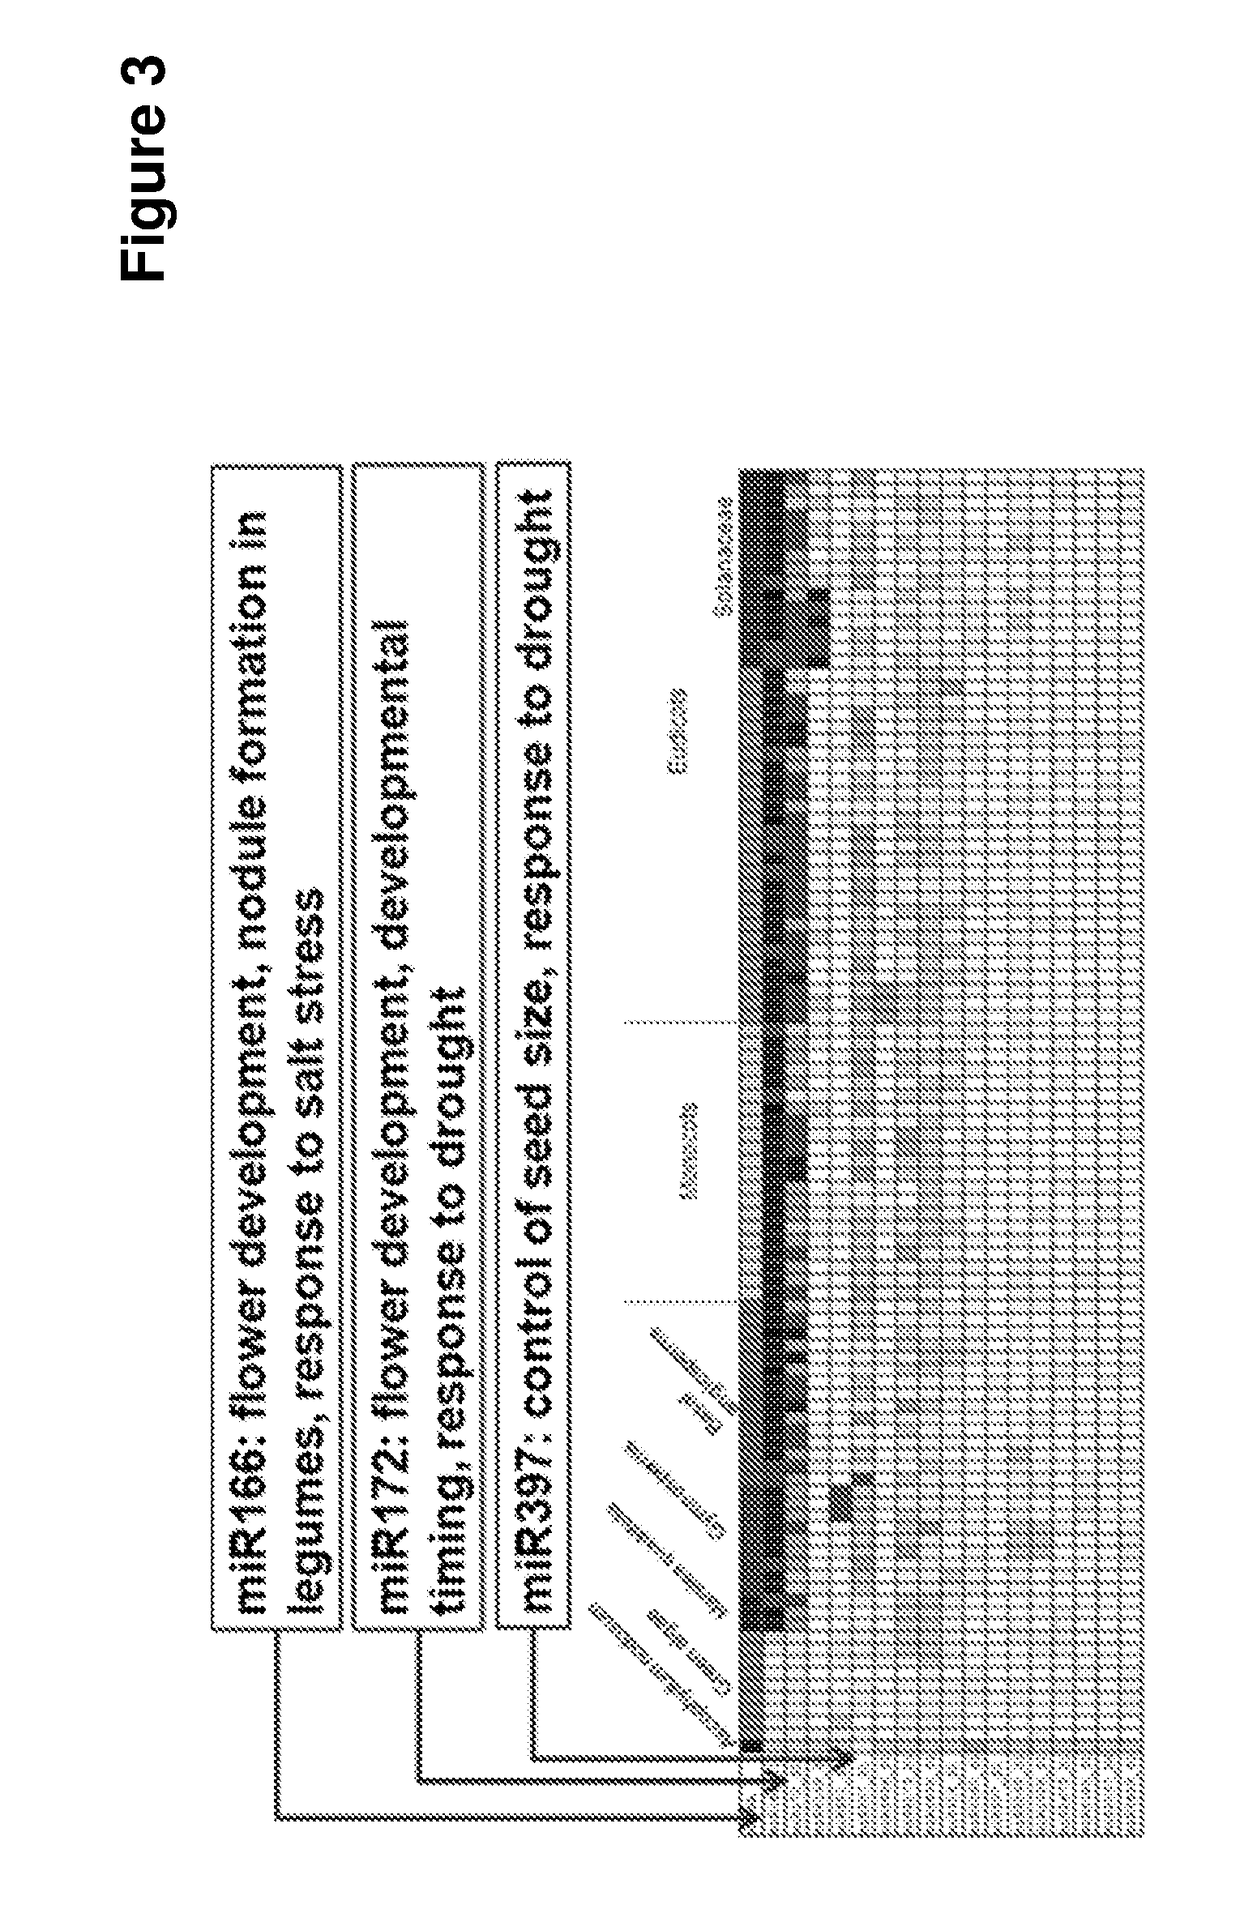 Method for modulating plant processes